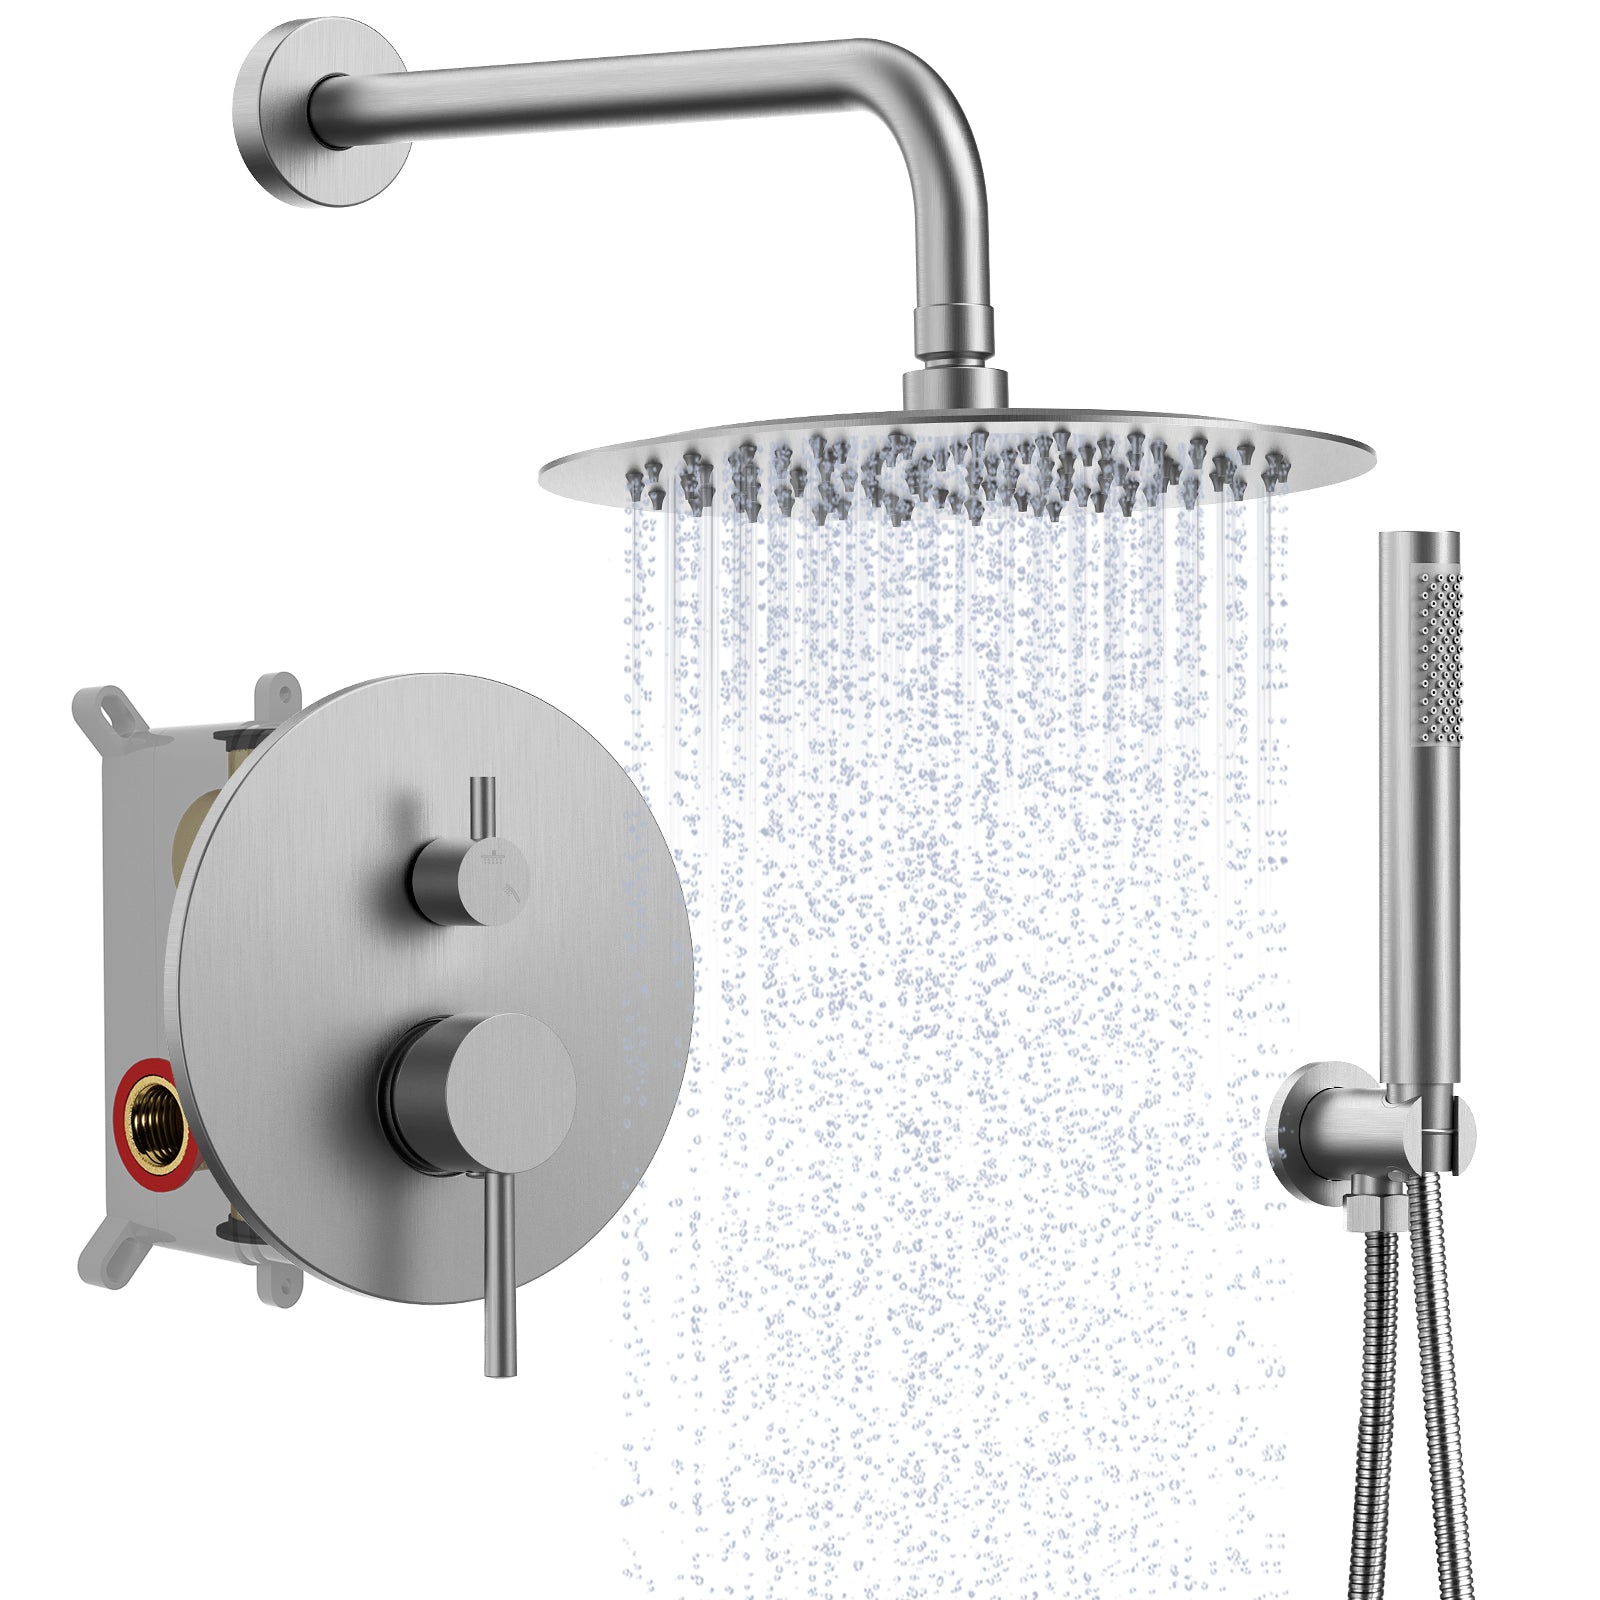 M6610NI-10BL EVERSTEIN Shower Head Faucet System Combo Set - Rainfall Bathroom Shower Faucet Kit with Handheld Spray Hose, High-Pressure Luxury Wall Mount Shower Fixture Filter Accessories Gifts Rough-in Valve Body & Trim